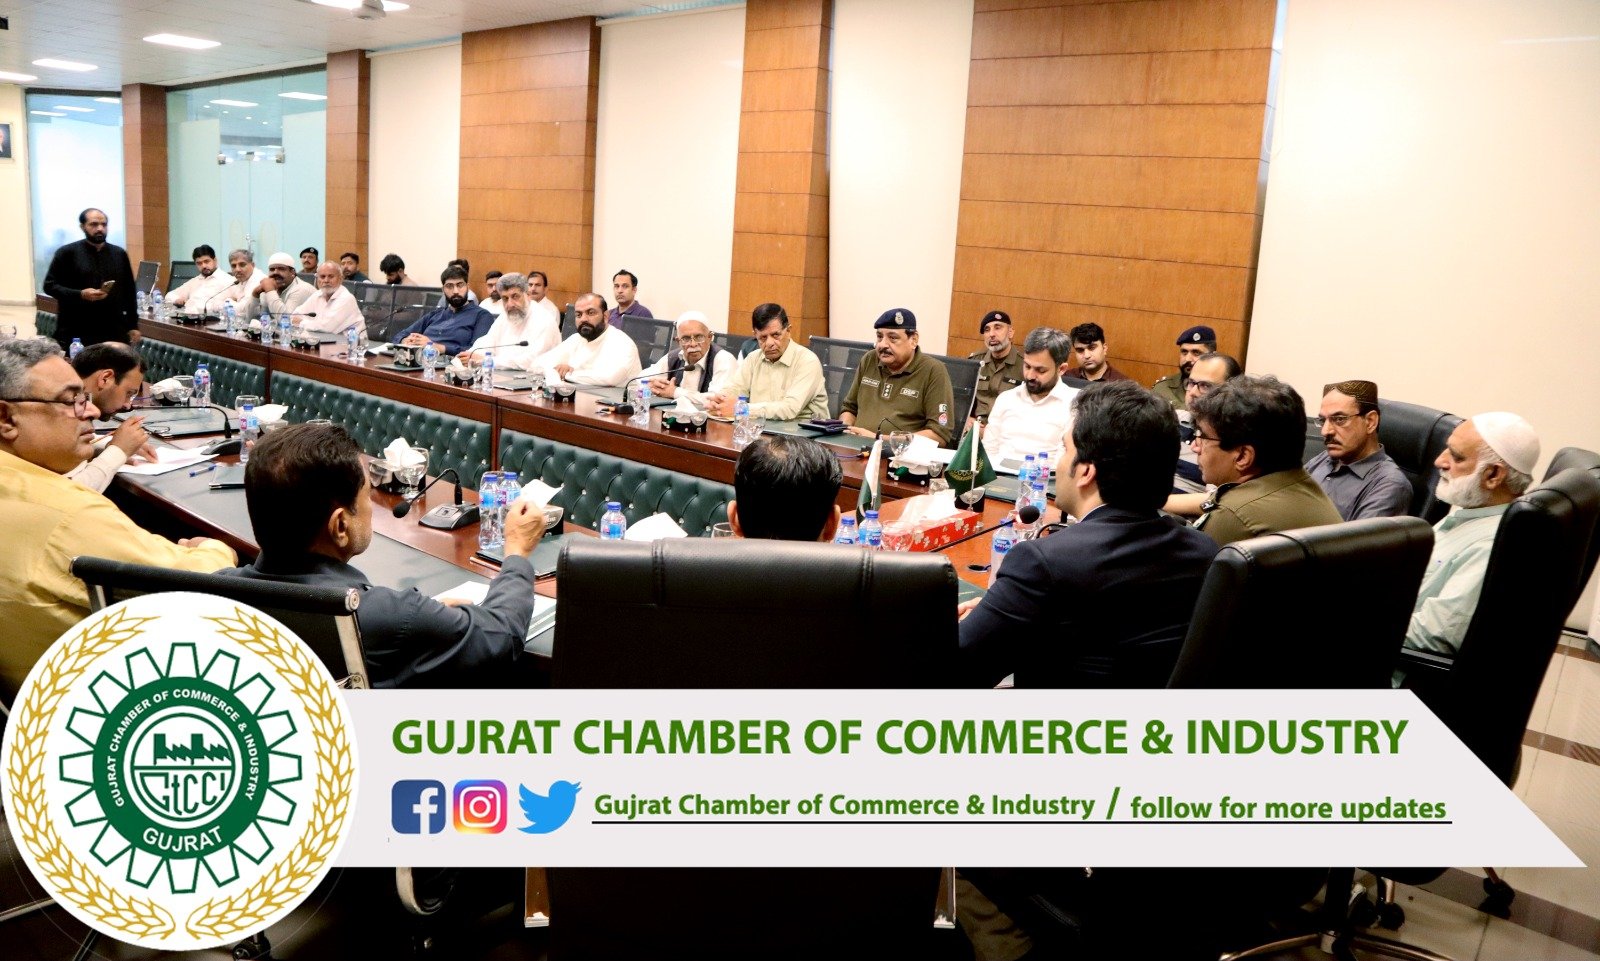 Gujrat Chamber of Commerce and Industry recently held a meeting with Mr. Mustansir Atta Bajwa, the #District_Police_Officer of #Gujrat, to discuss security arrangements for the month of #Muharram.